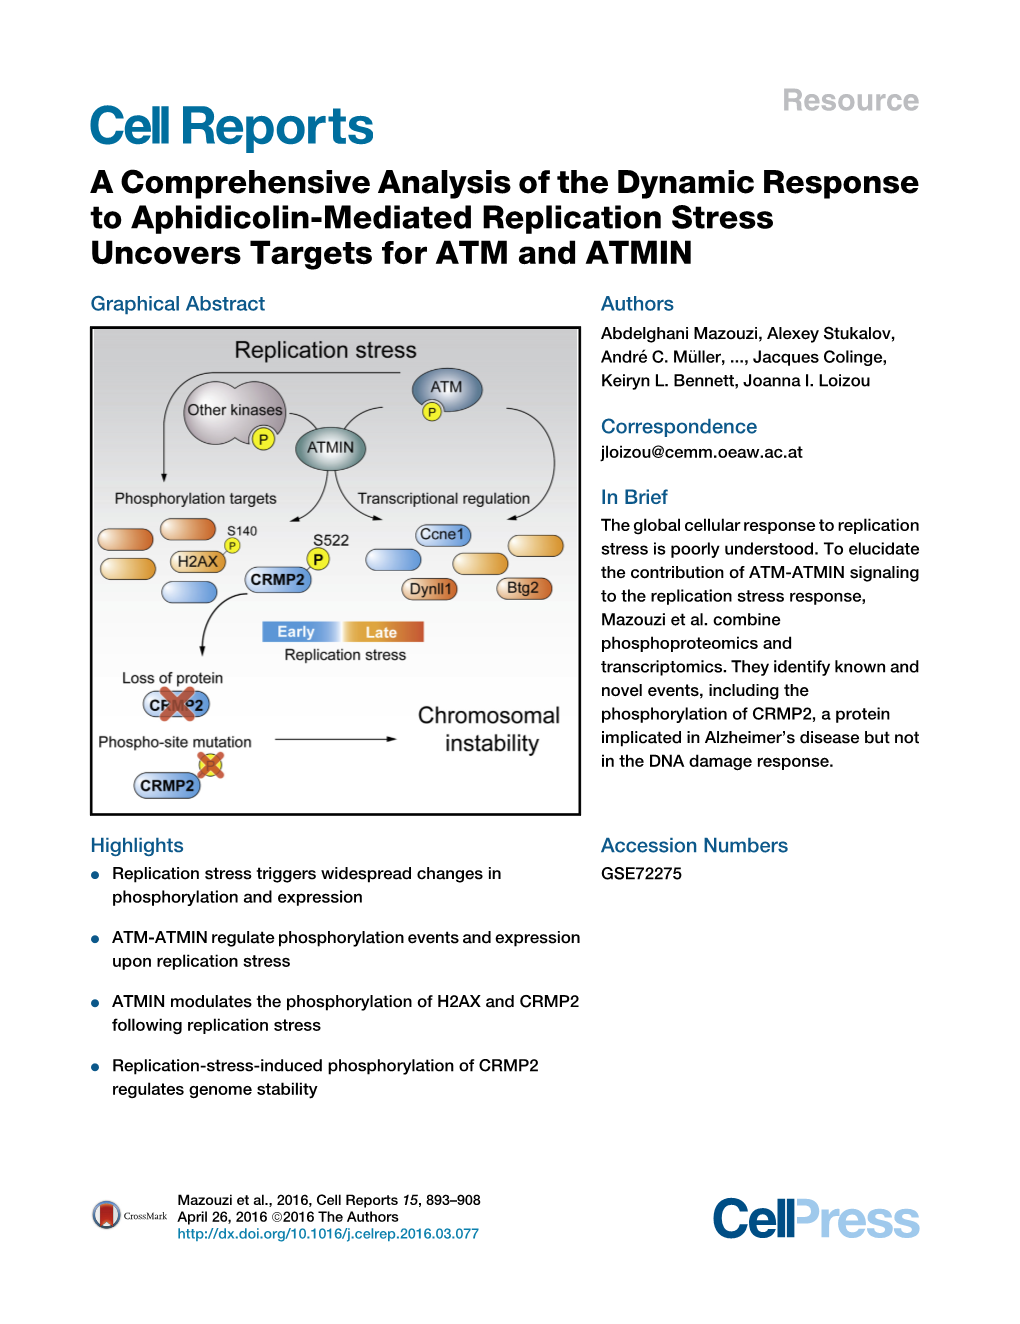 A Comprehensive Analysis of the Dynamic Response to Aphidicolin-Mediated Replication Stress Uncovers Targets for ATM and ATMIN